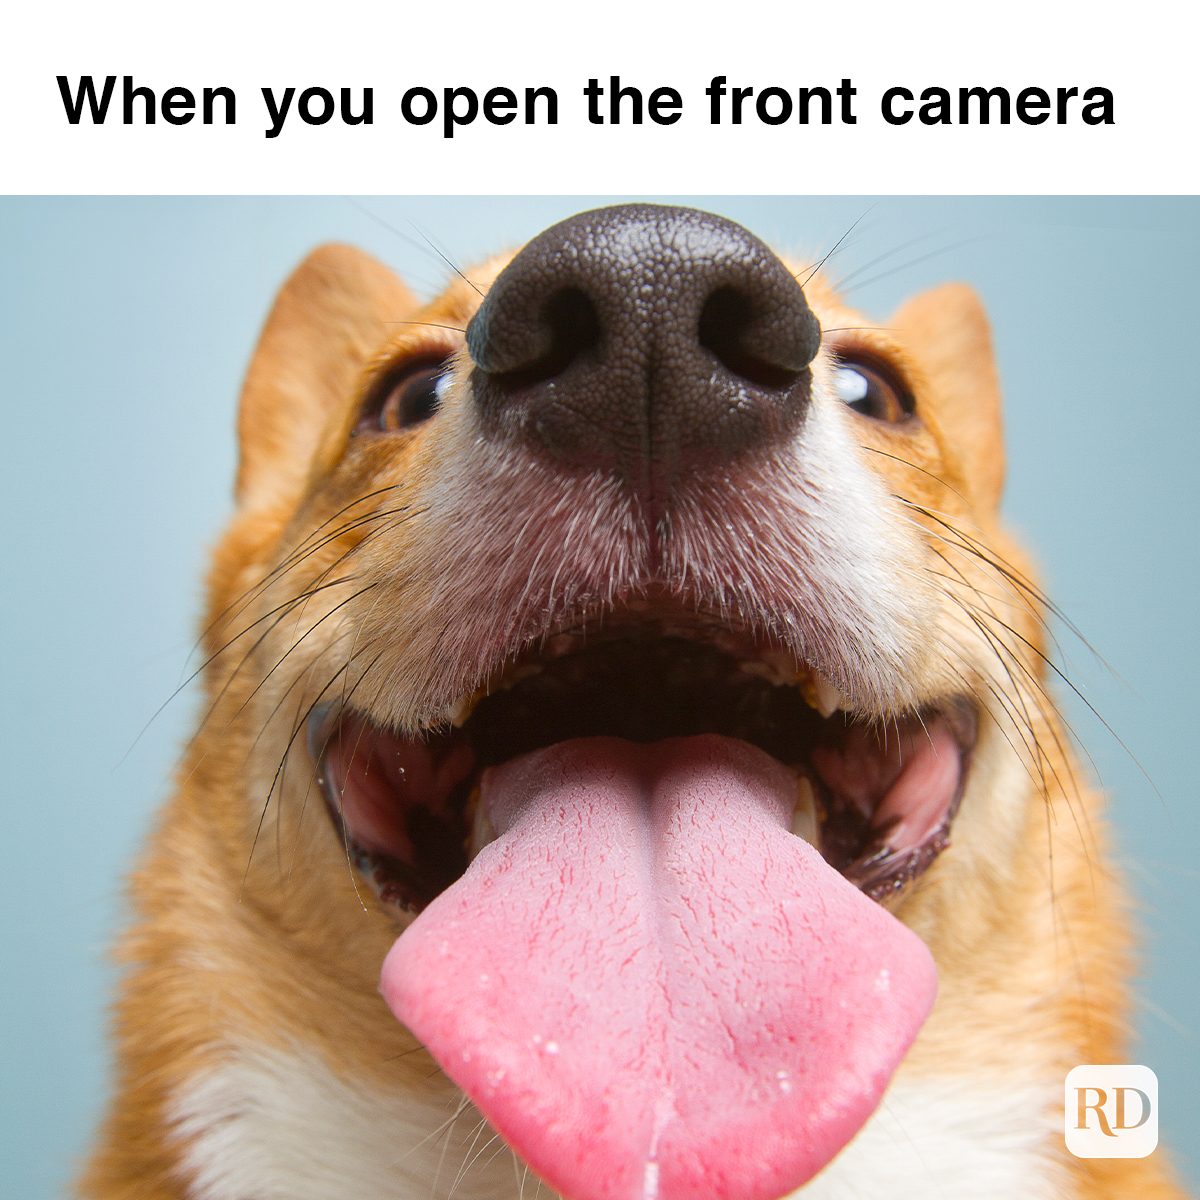 30 Hilarious Corgi Memes for When You're Feeling Ruff | Reader's Digest